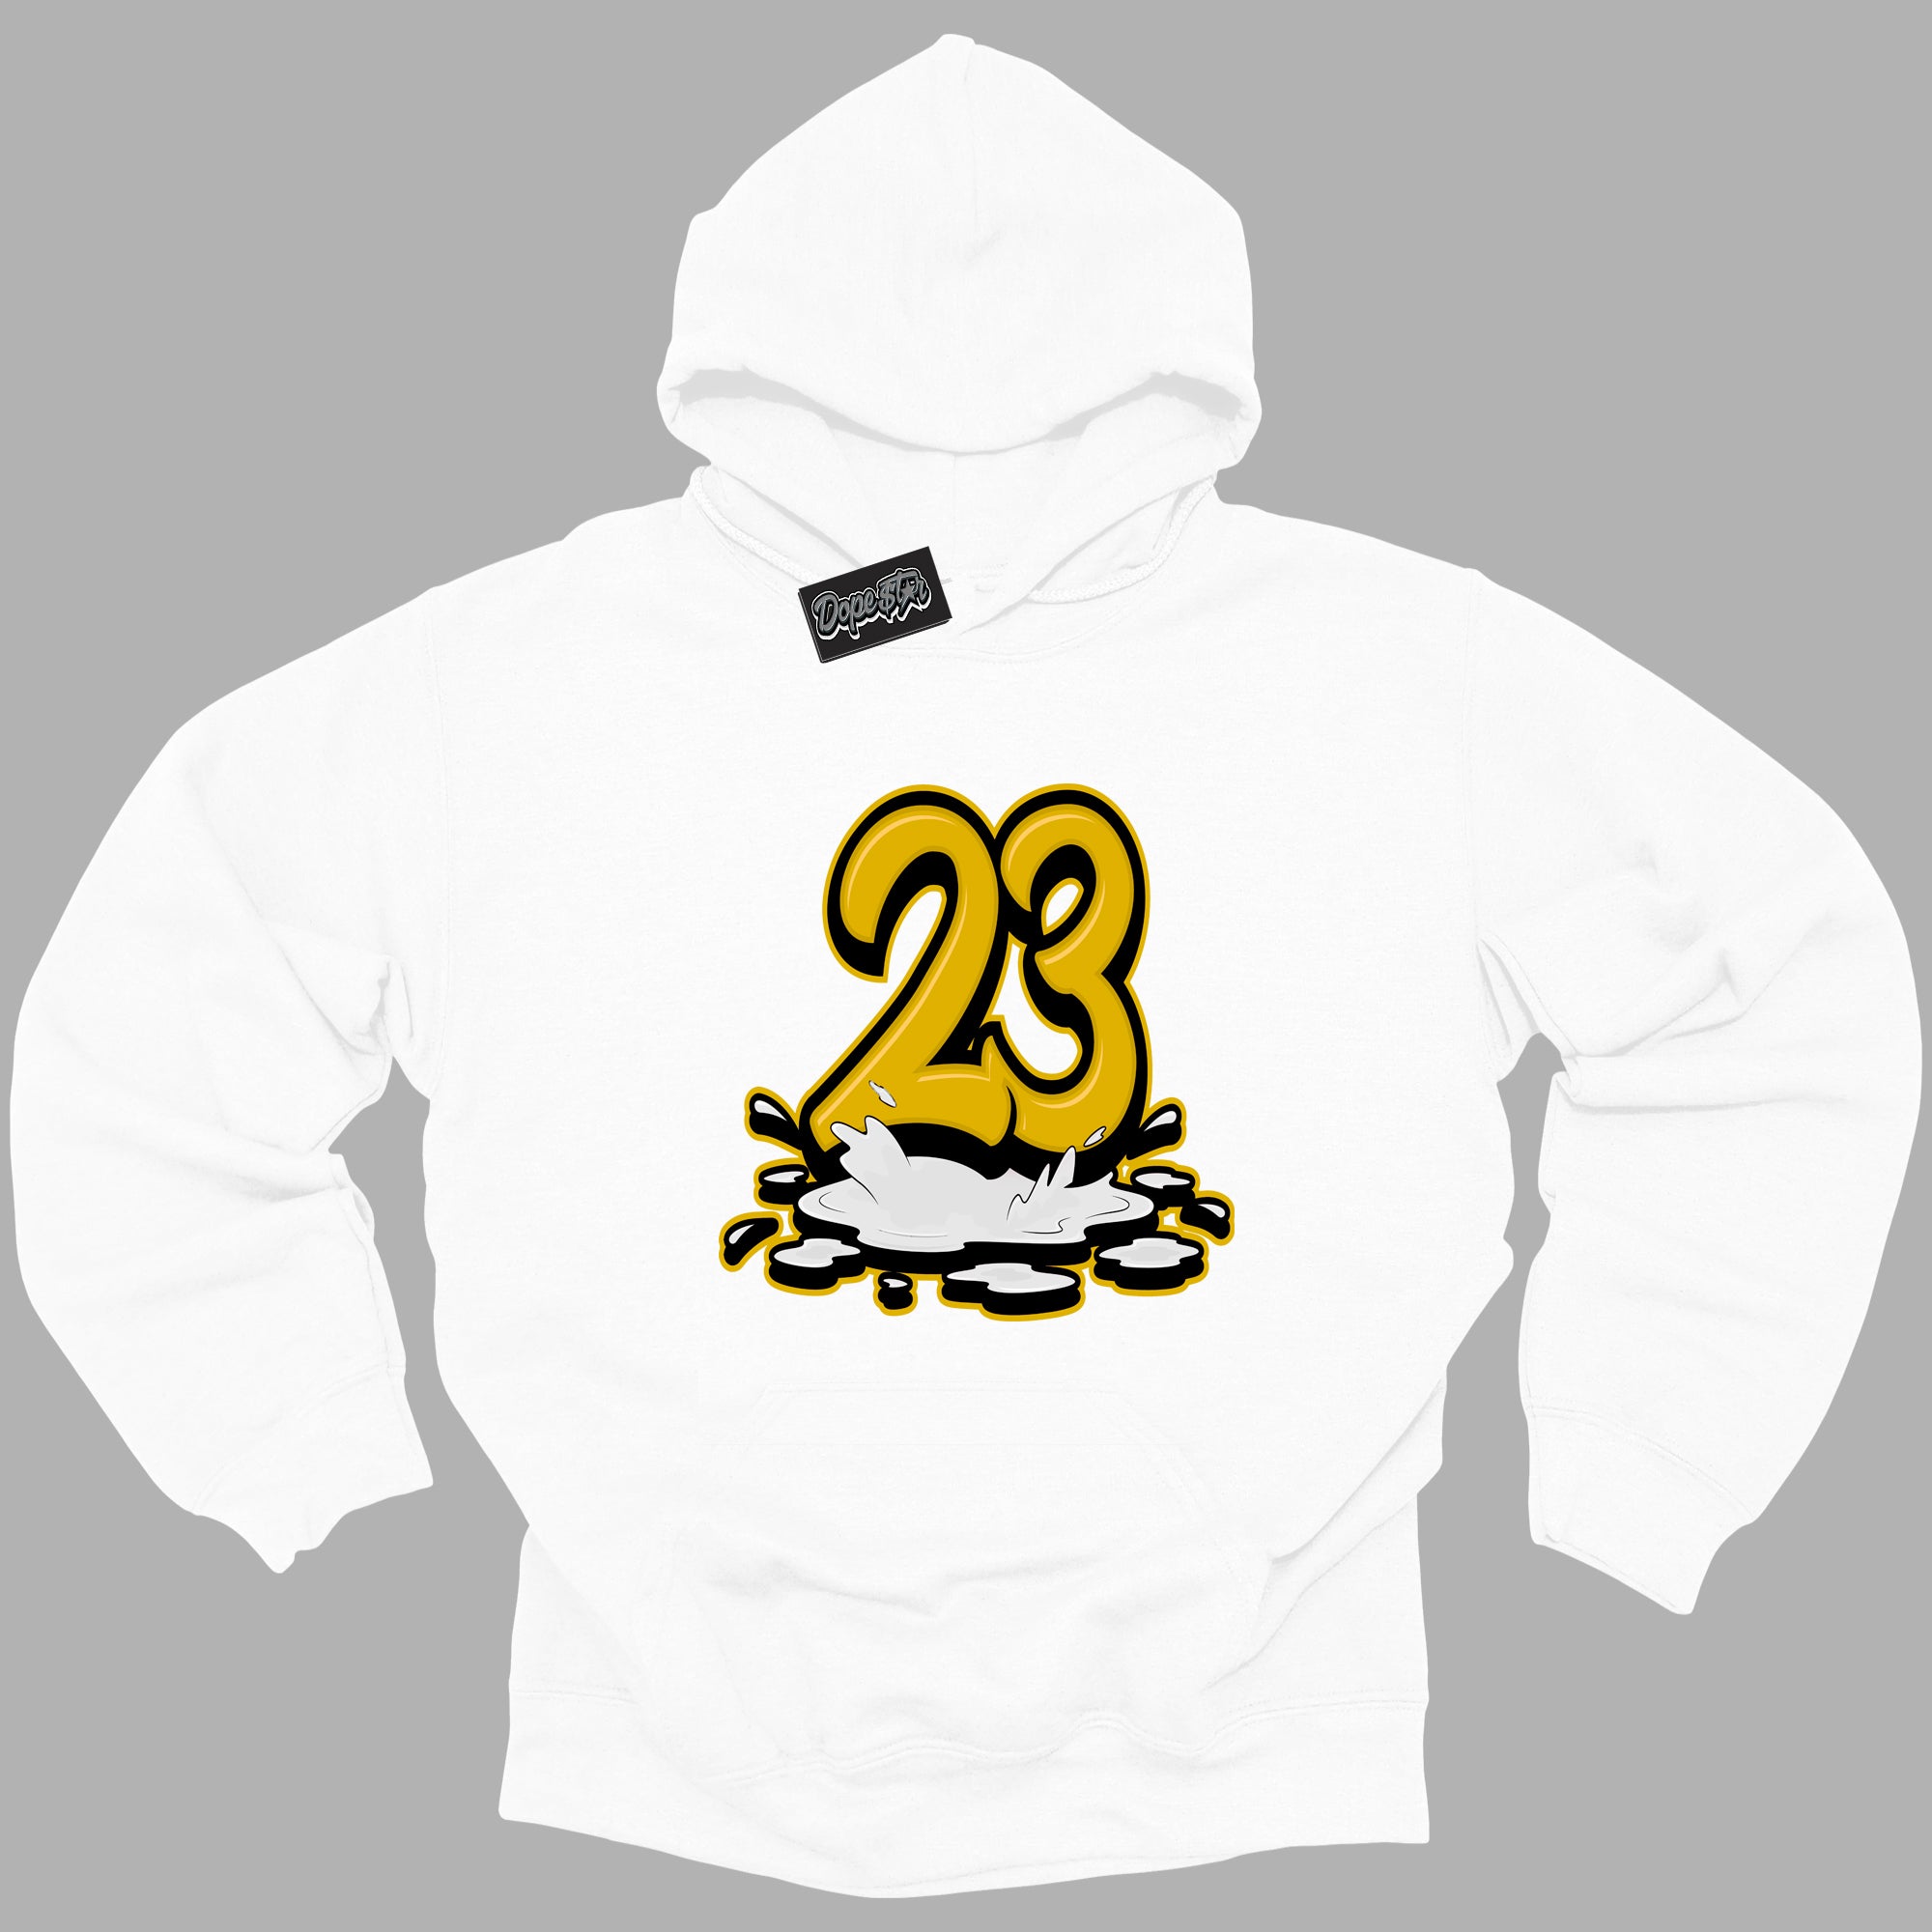 Cool White Hoodie with “ 23 Melting  ”  design that Perfectly Matches Yellow Ochre 6s Sneakers.